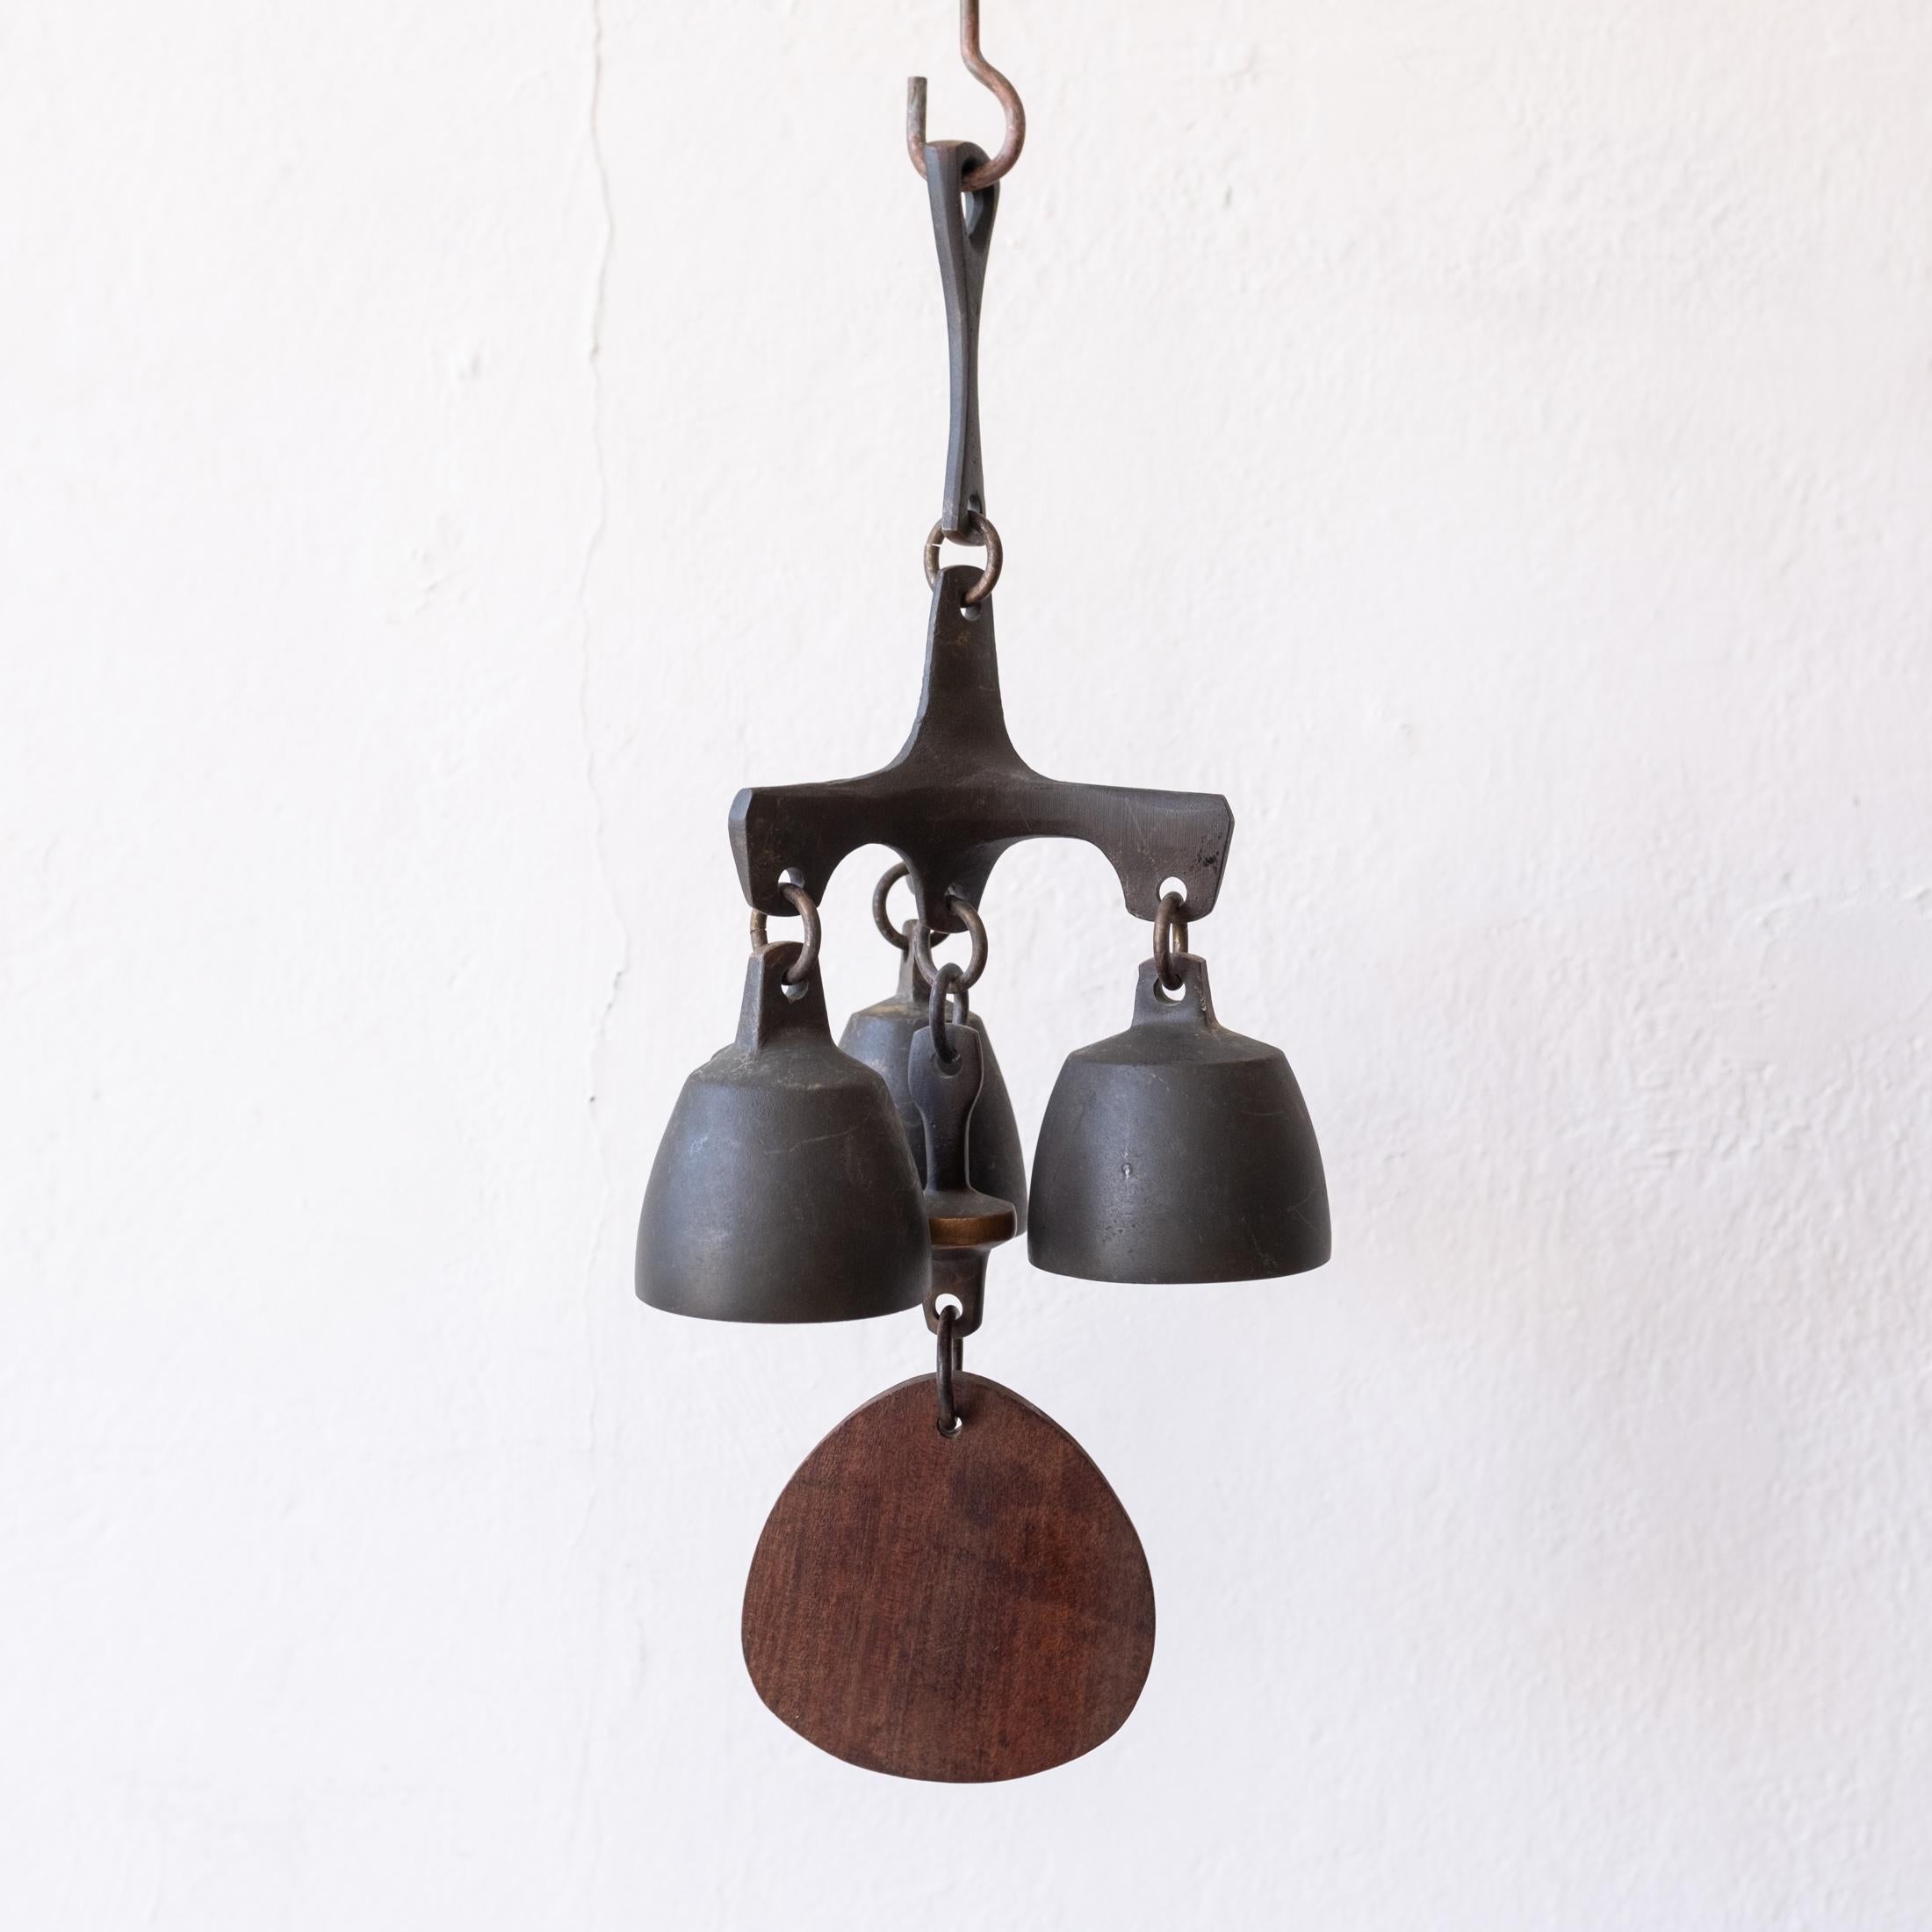 Solid bronze bell with a wood wind catcher. Years of nice patina. Could be used as a doorbell. It has a beautiful pitch.